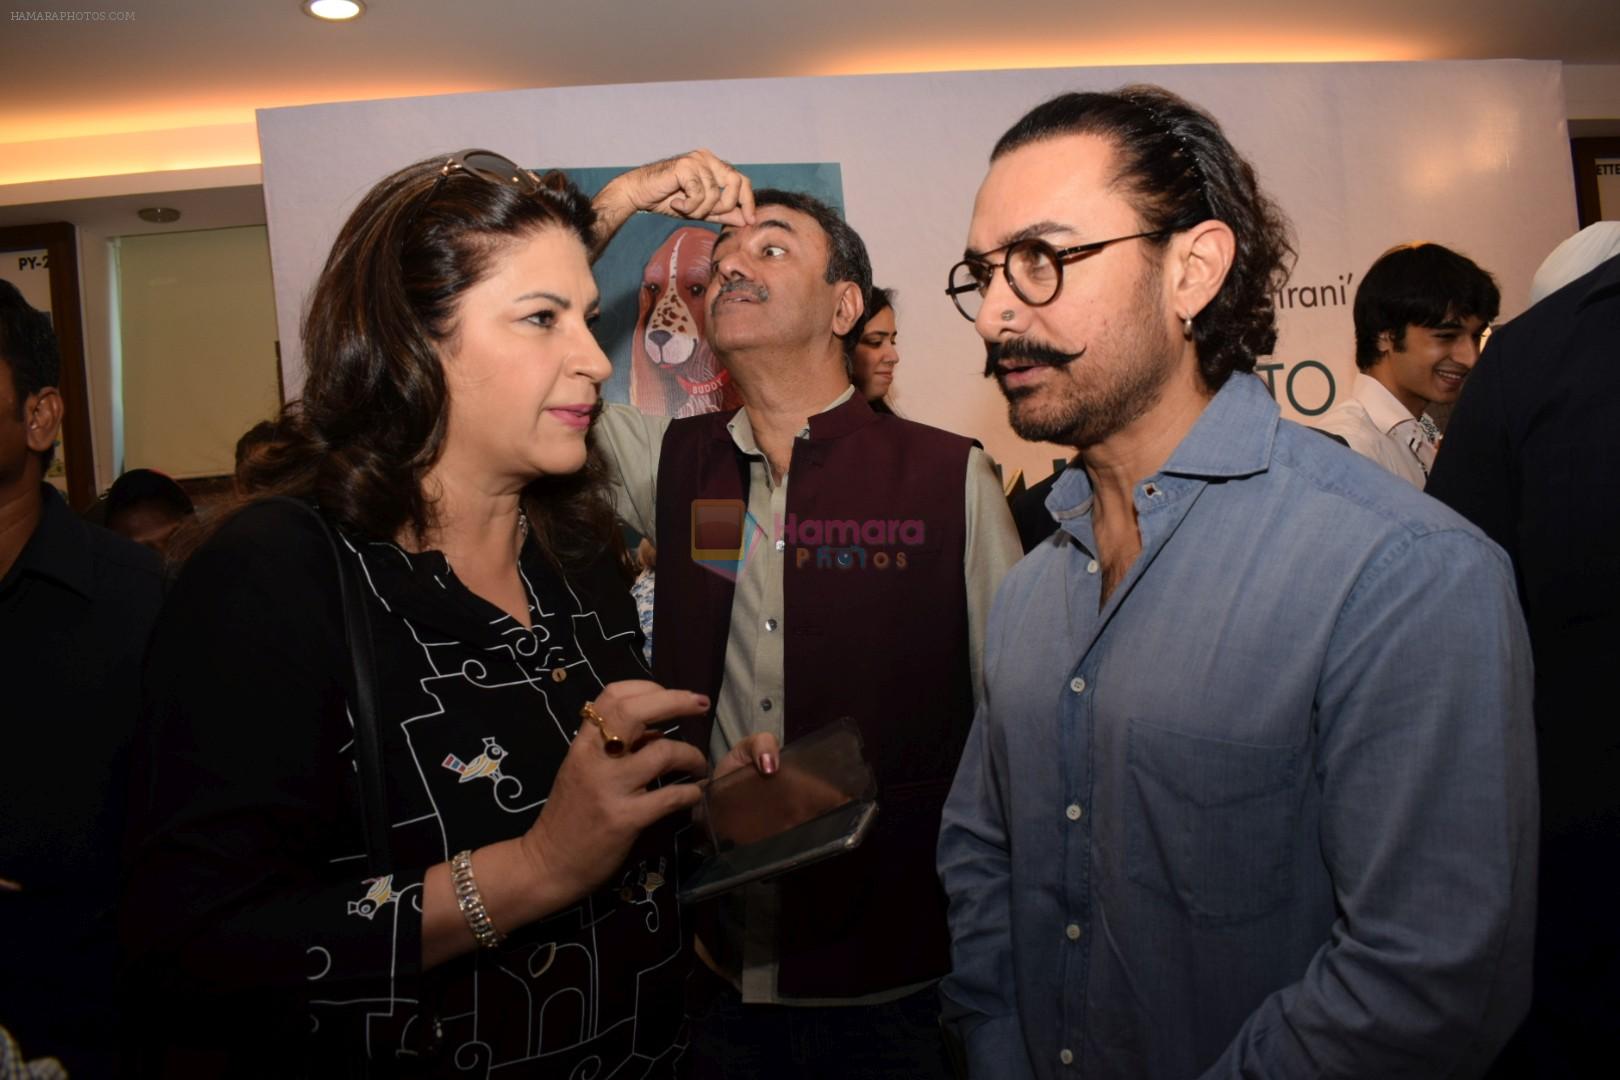 Aamir Khan at the book launch of Manjeet Hirani's book titled _How to be Human - Life lessons by Buddy Hirani_ in Title Waves, Bandra, Mumbai on 5th March 2018